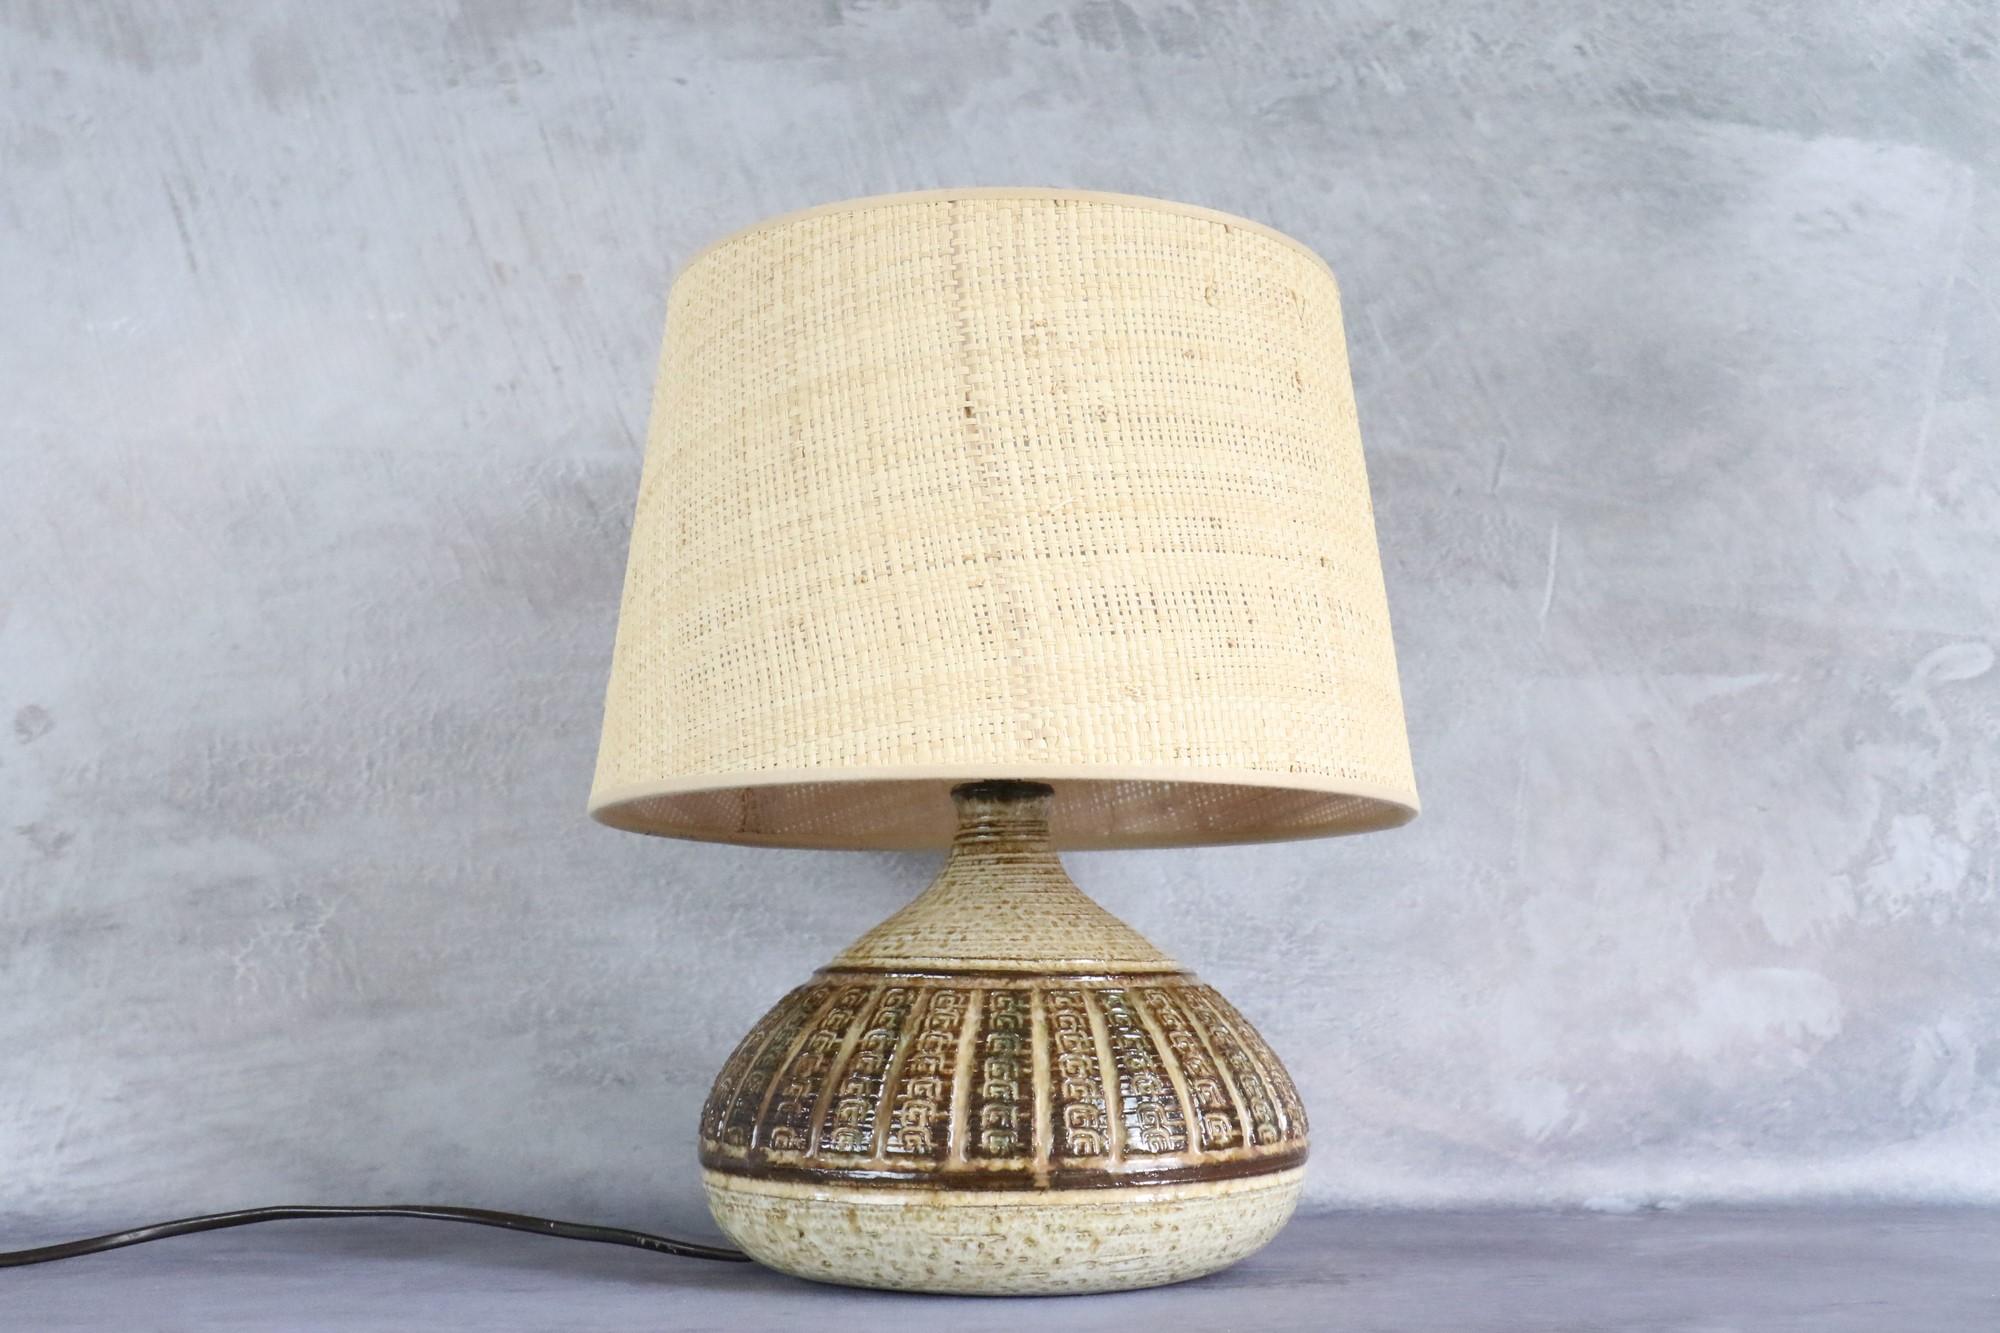 20th Century Midcentury French Ceramic Lamp by Marcel Giraud, Vallauris, 1960s Pottery For Sale